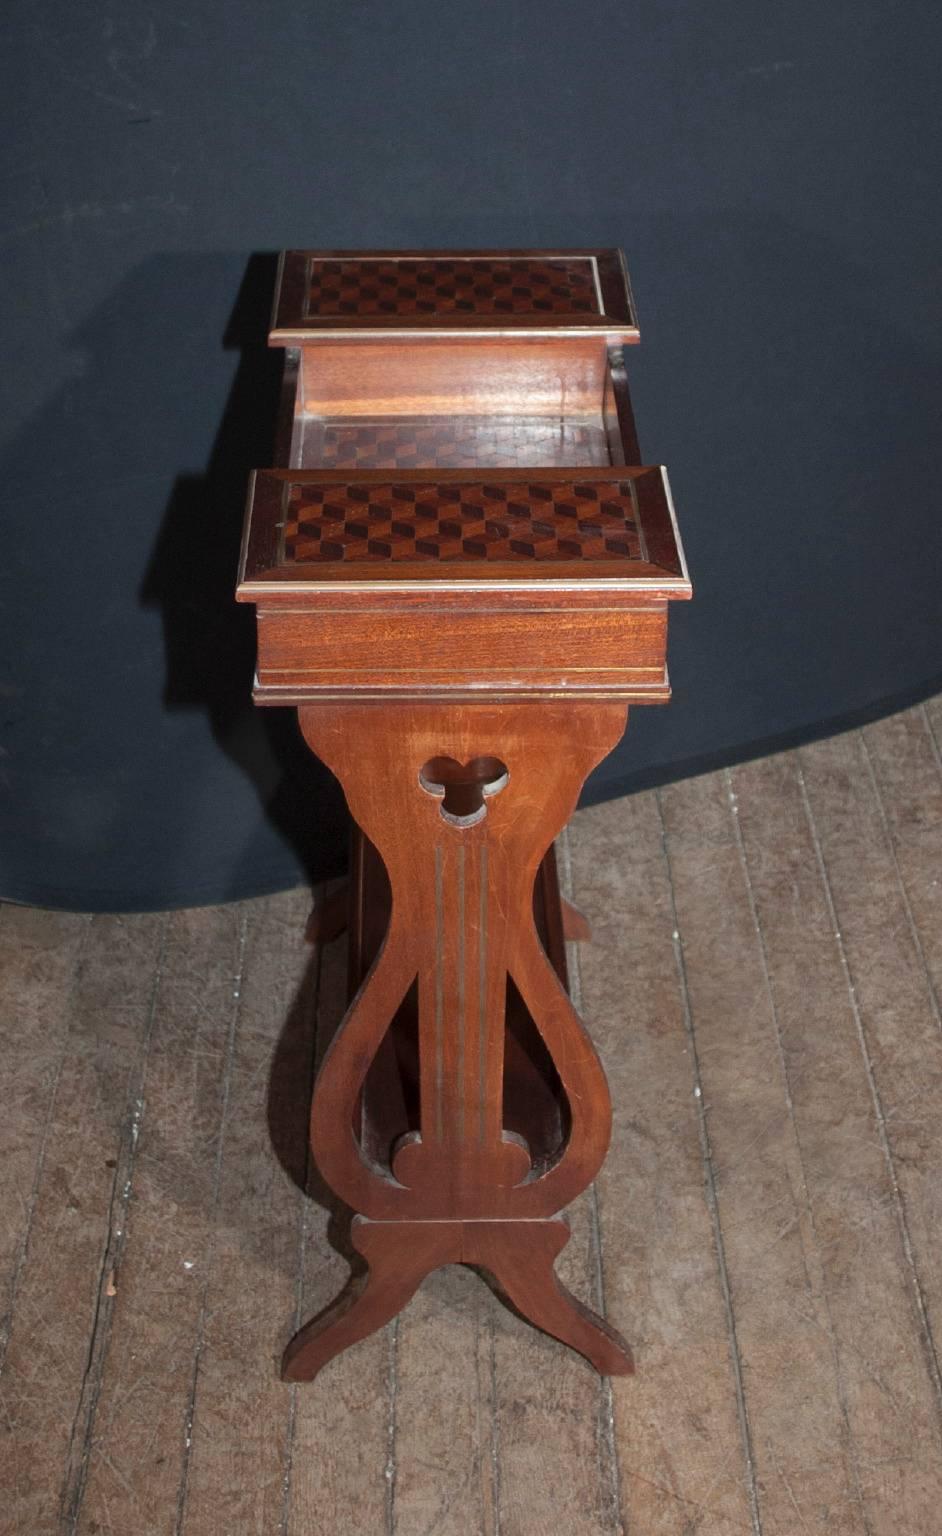 This beautiful French Restauration style table dates back to the 1800s and is made of beautiful walnut wood. The table is in the shape of a lyre, and features a top inlaid with parquetry chevron shapes, a hinged box on either side for closed